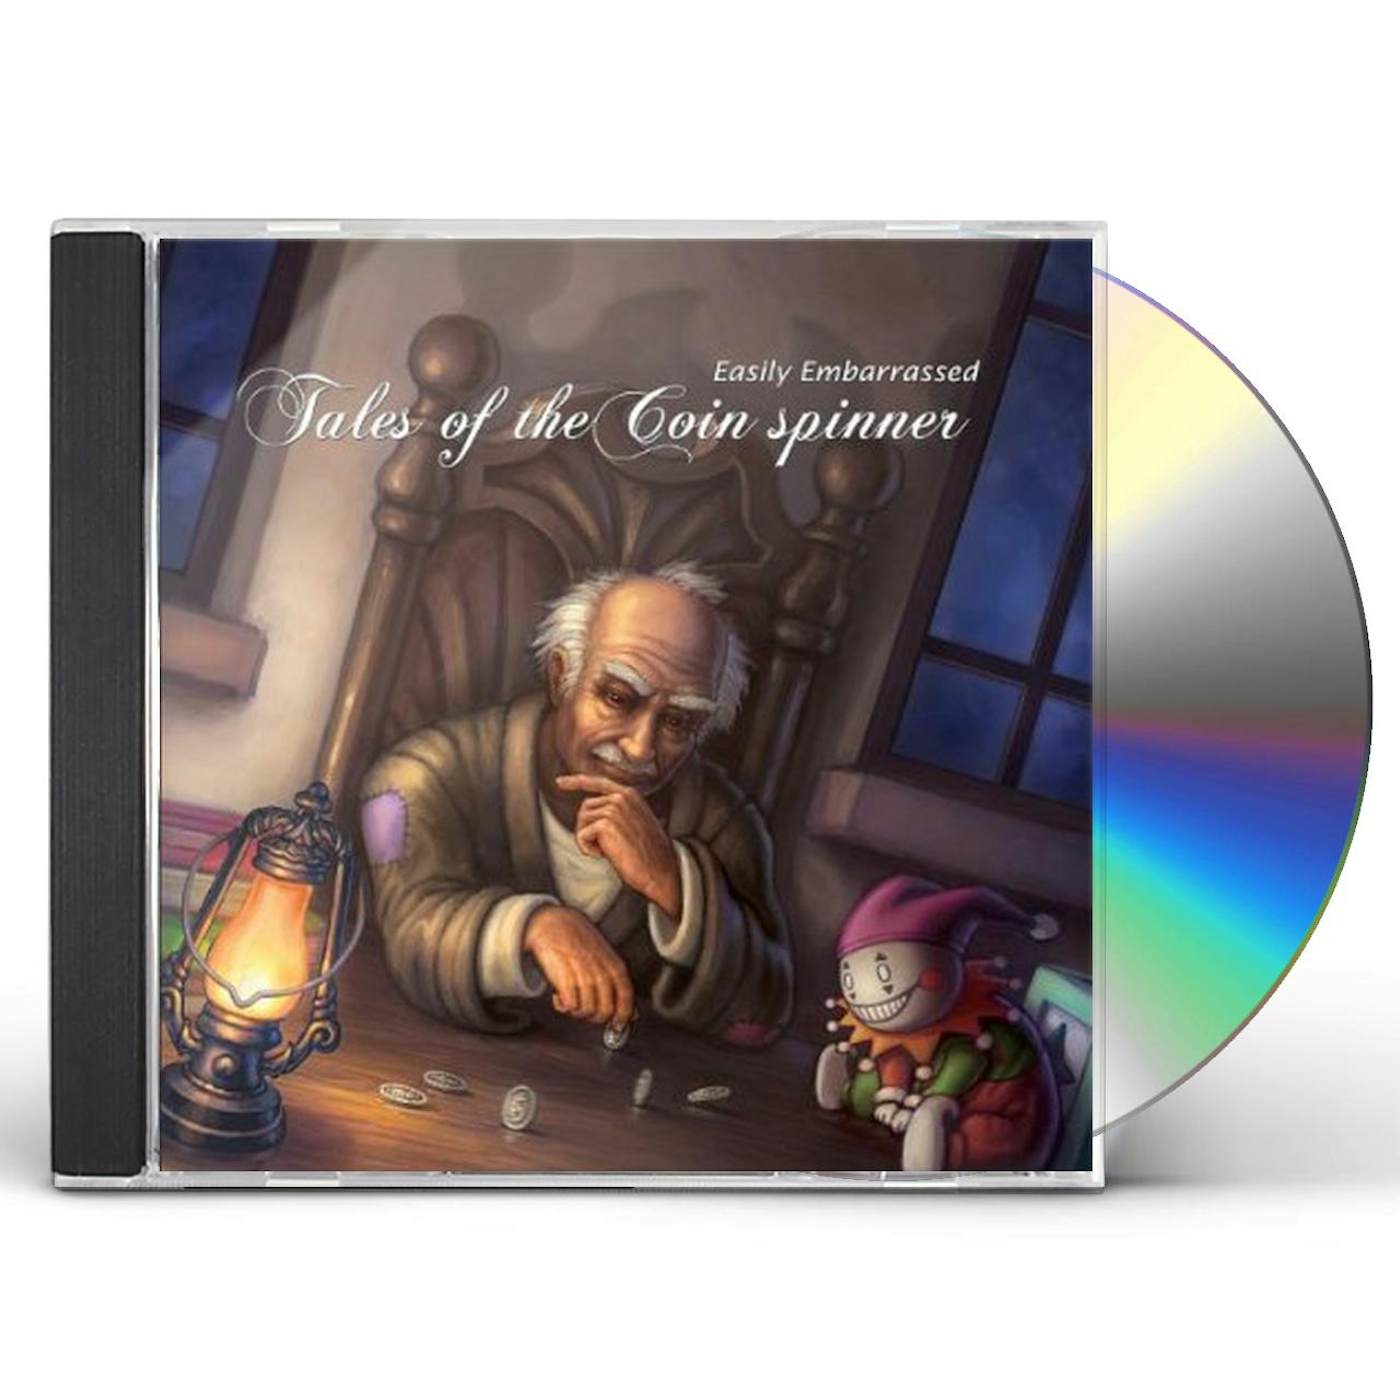 Easily Embarrassed TALES OF THE COIN SPINNER CD